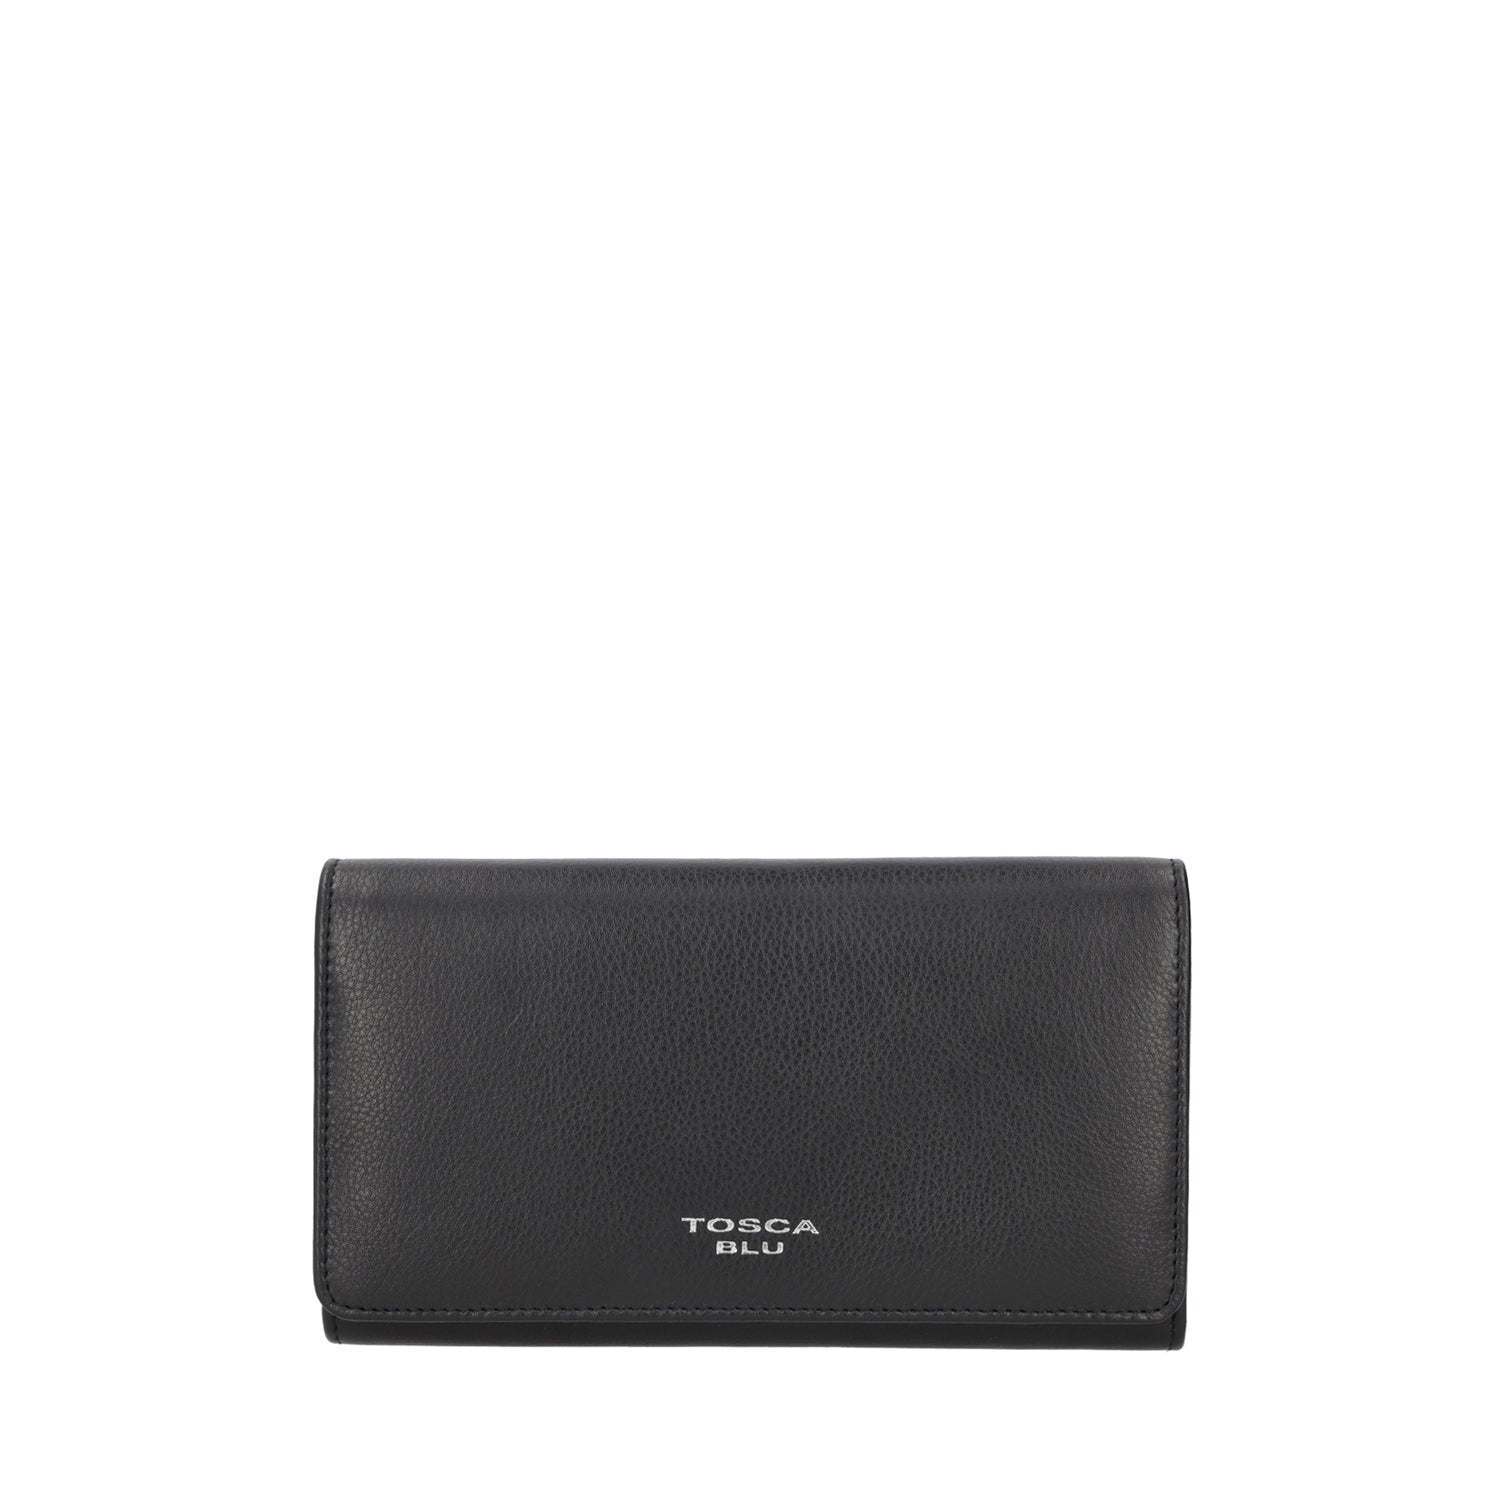 BLACK LARGE BASIC WALLETS WALLET WITH FLAP